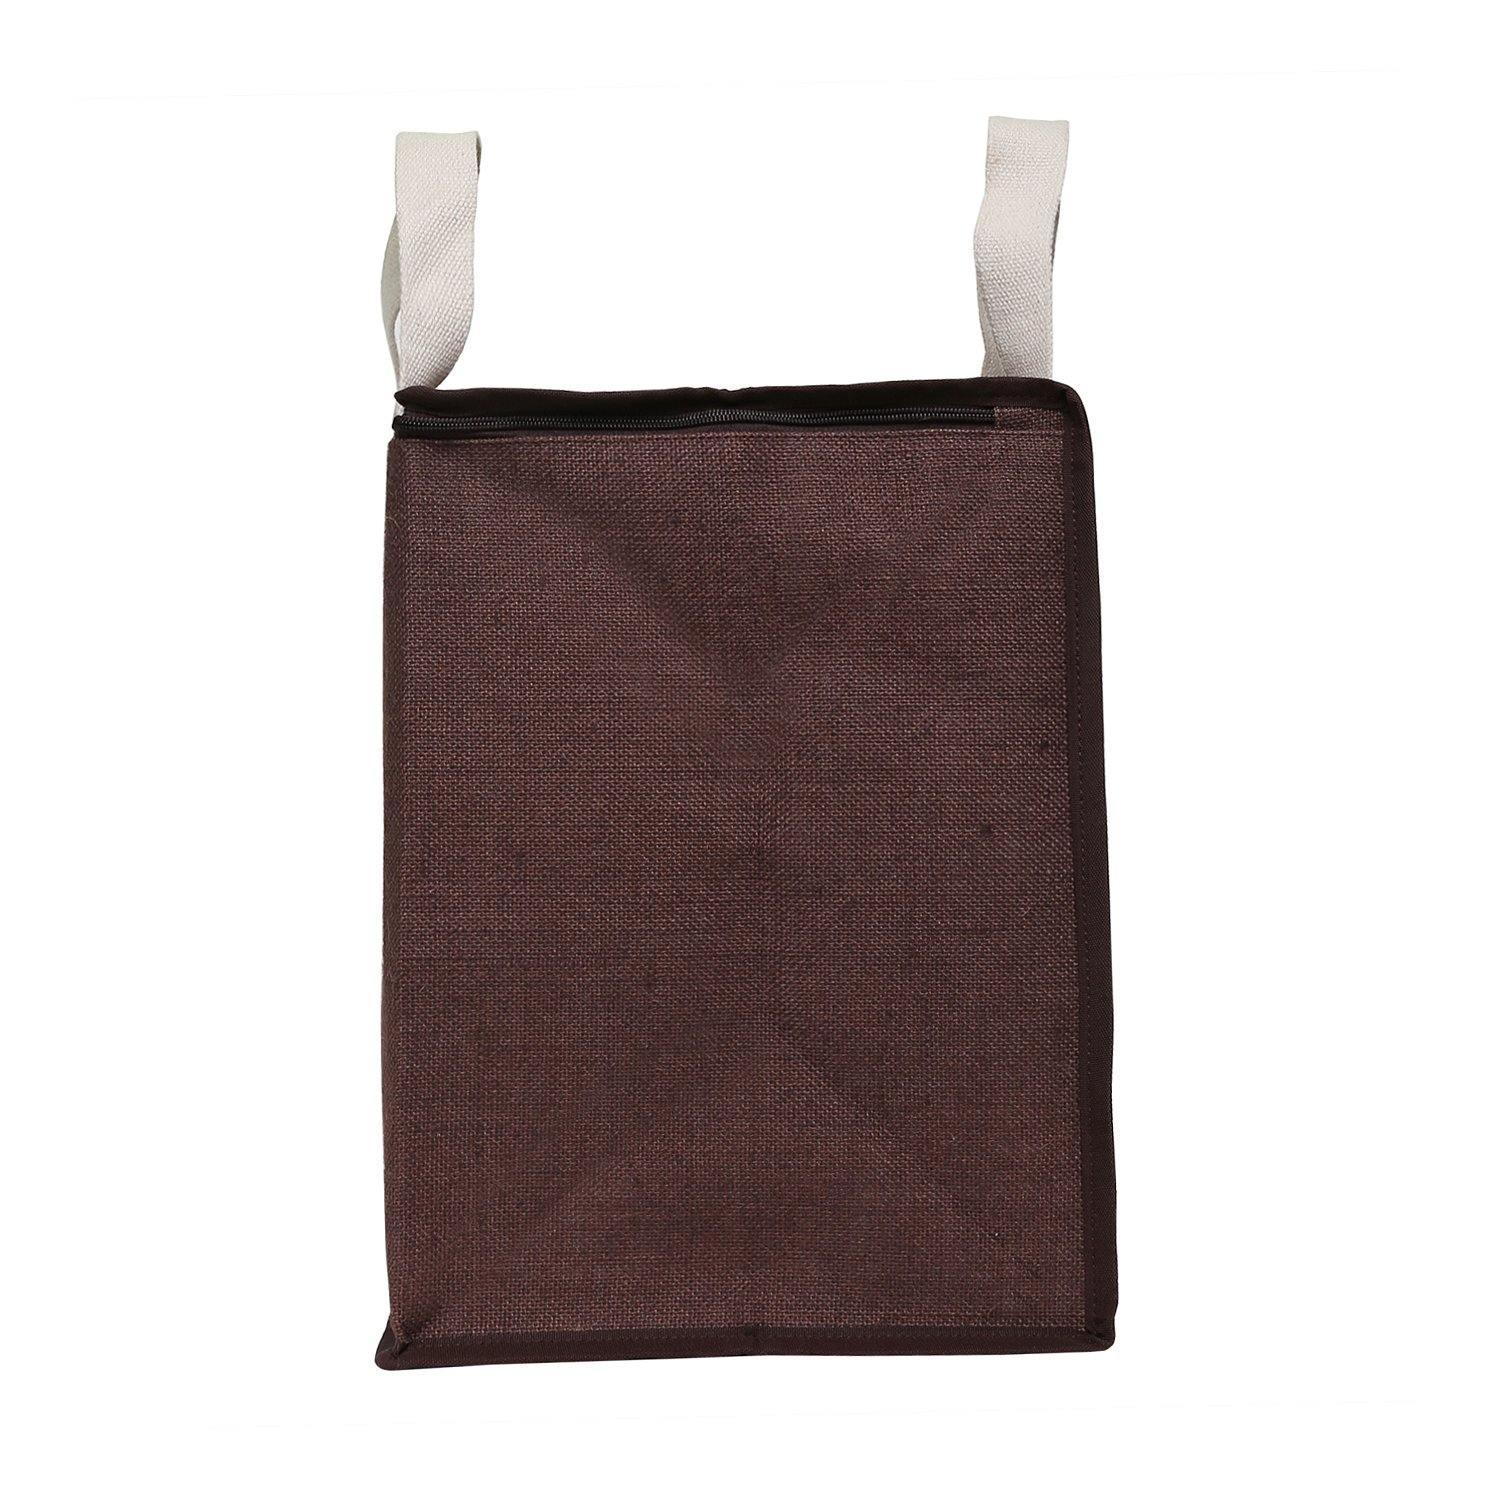 DOUBLE R BAGS Jute Shopping bags with Dual Zippers (Brown) - Double R Bags